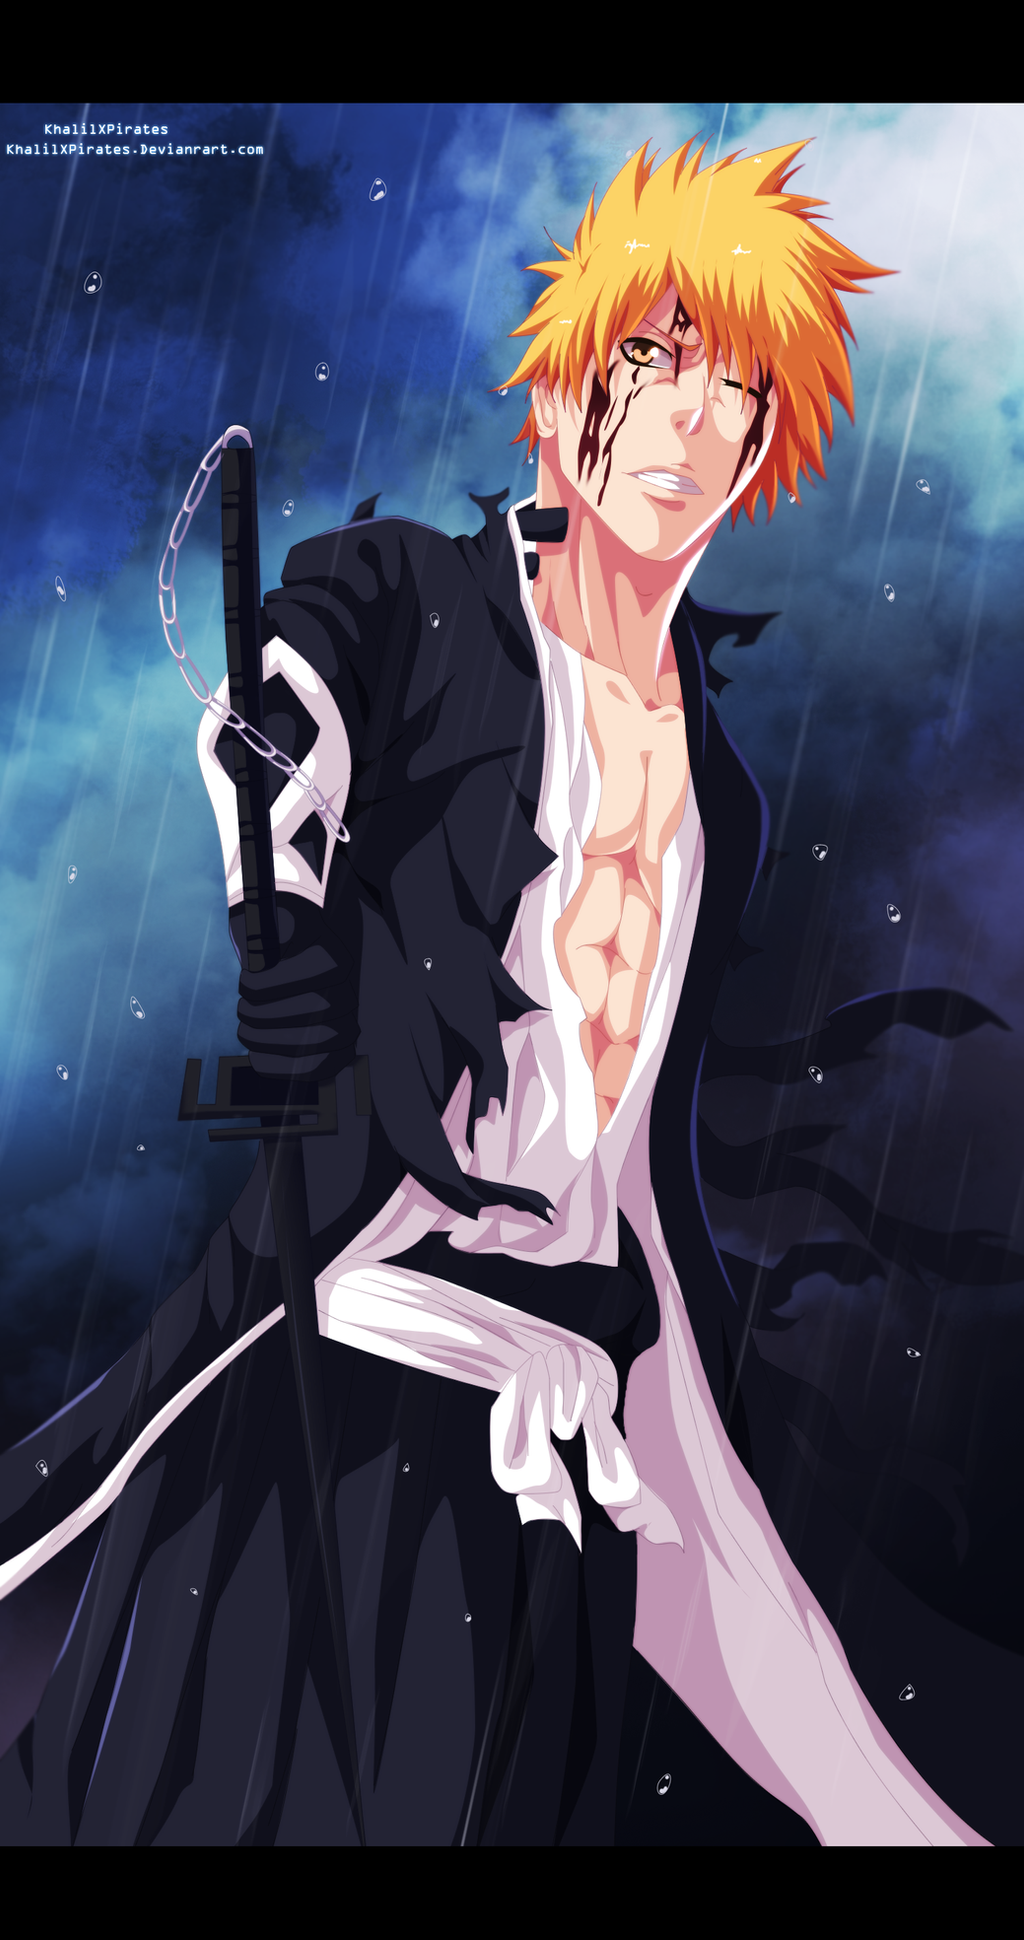 Bleach 512 - Protect The World by KhalilXPirates on DeviantArt